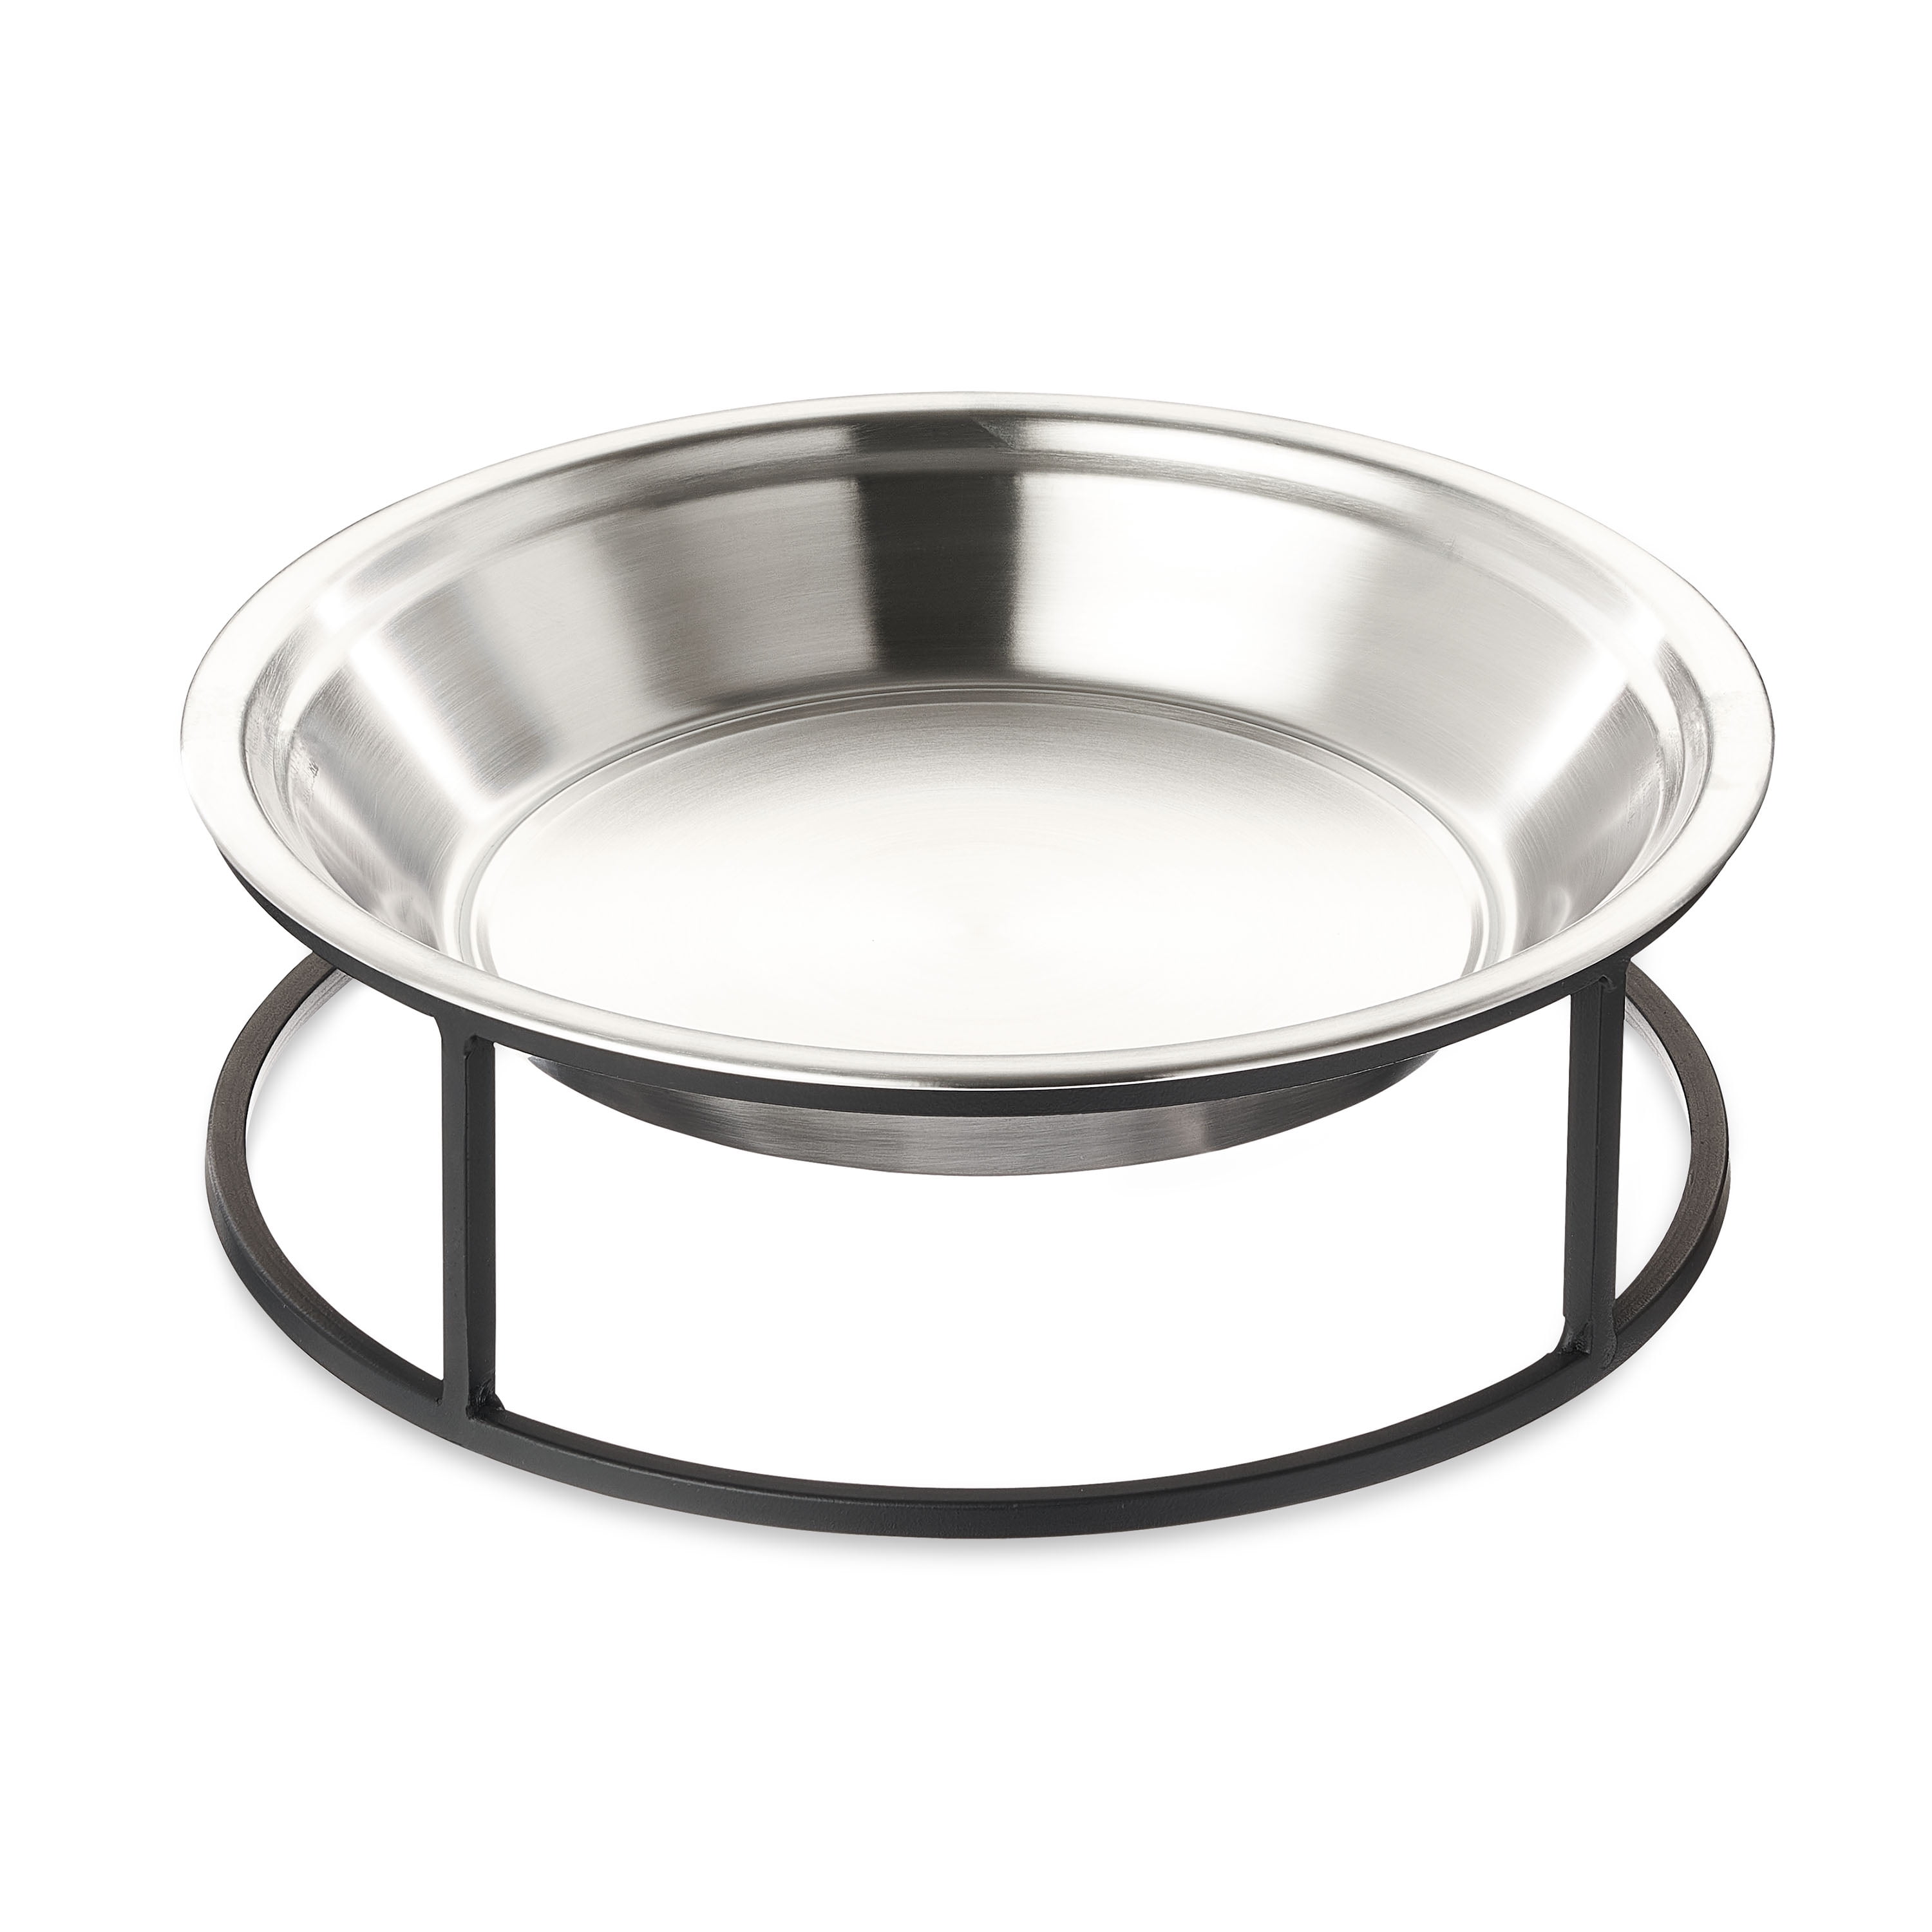 Lapensa Premium Stainless Steel Dog Bowls–Food Grade & Easy to